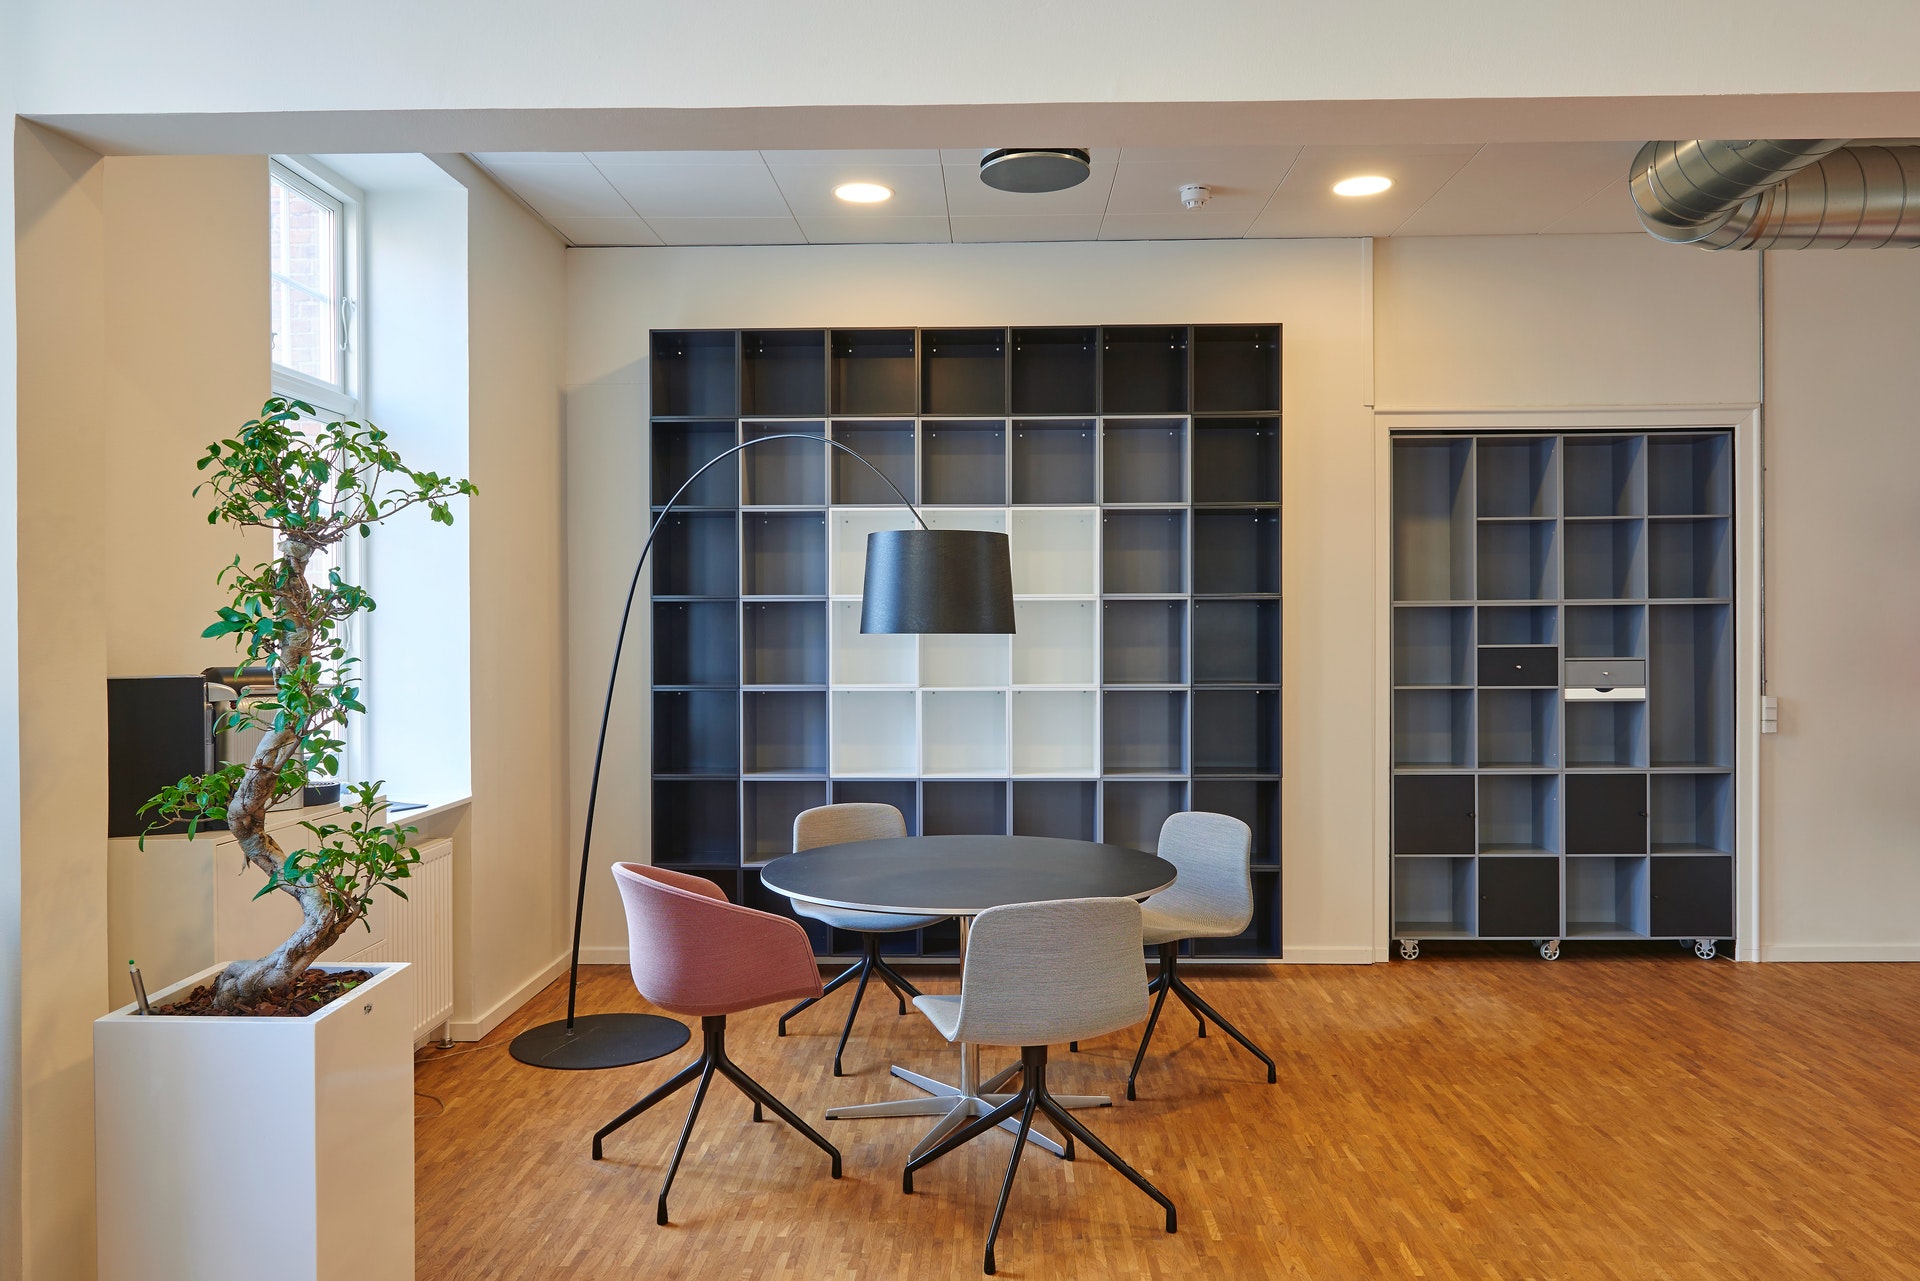 Commercial Office Spaces trends